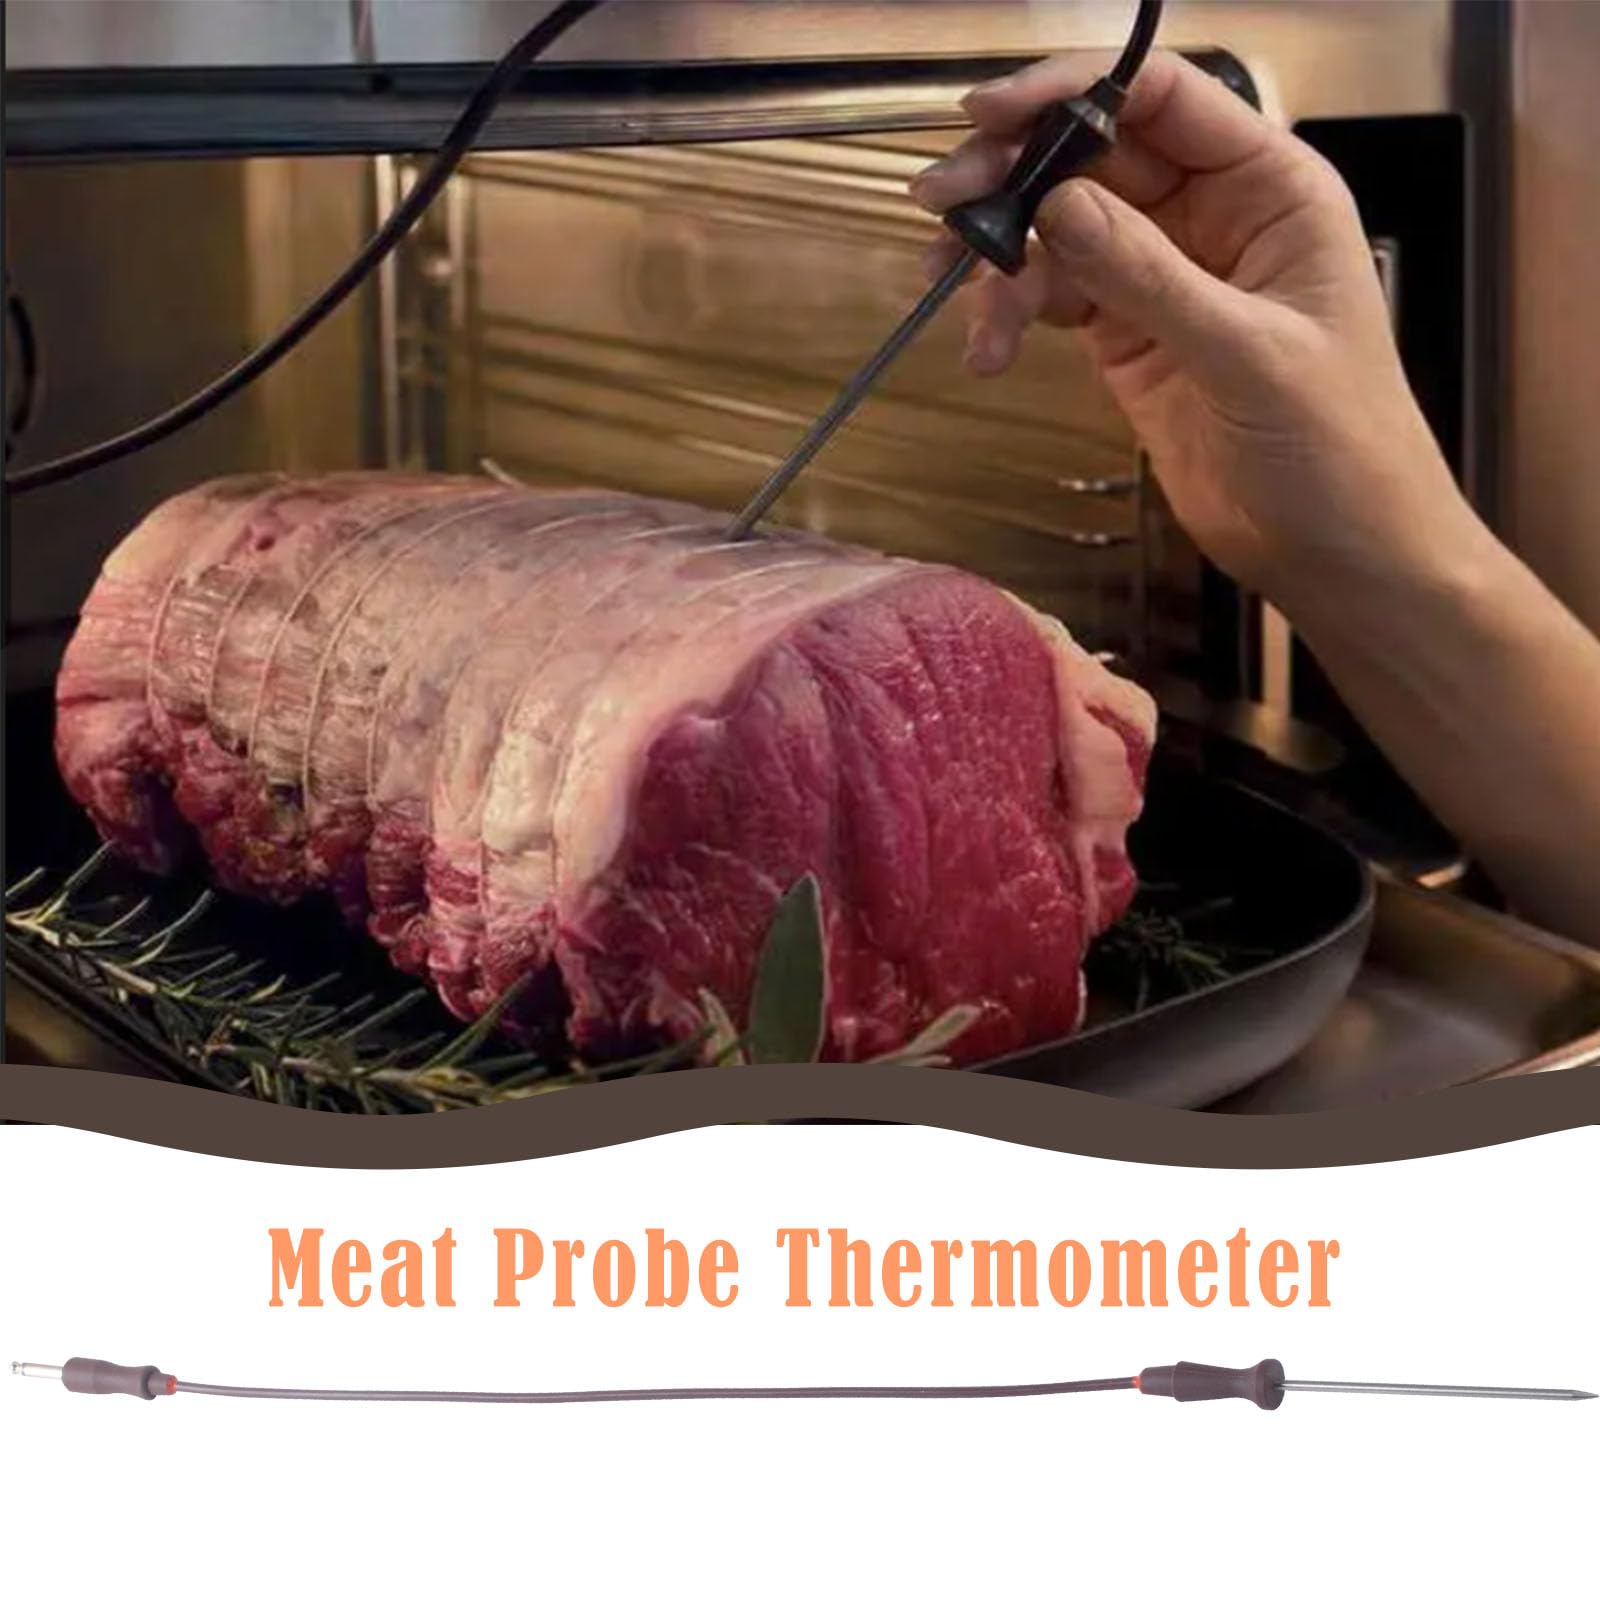 00755060 Meat Probe Thermometer Compatible with Thermador, Bosch, BSH Range Stove, Oven, Grill, Baker,Replace 492332 00492332